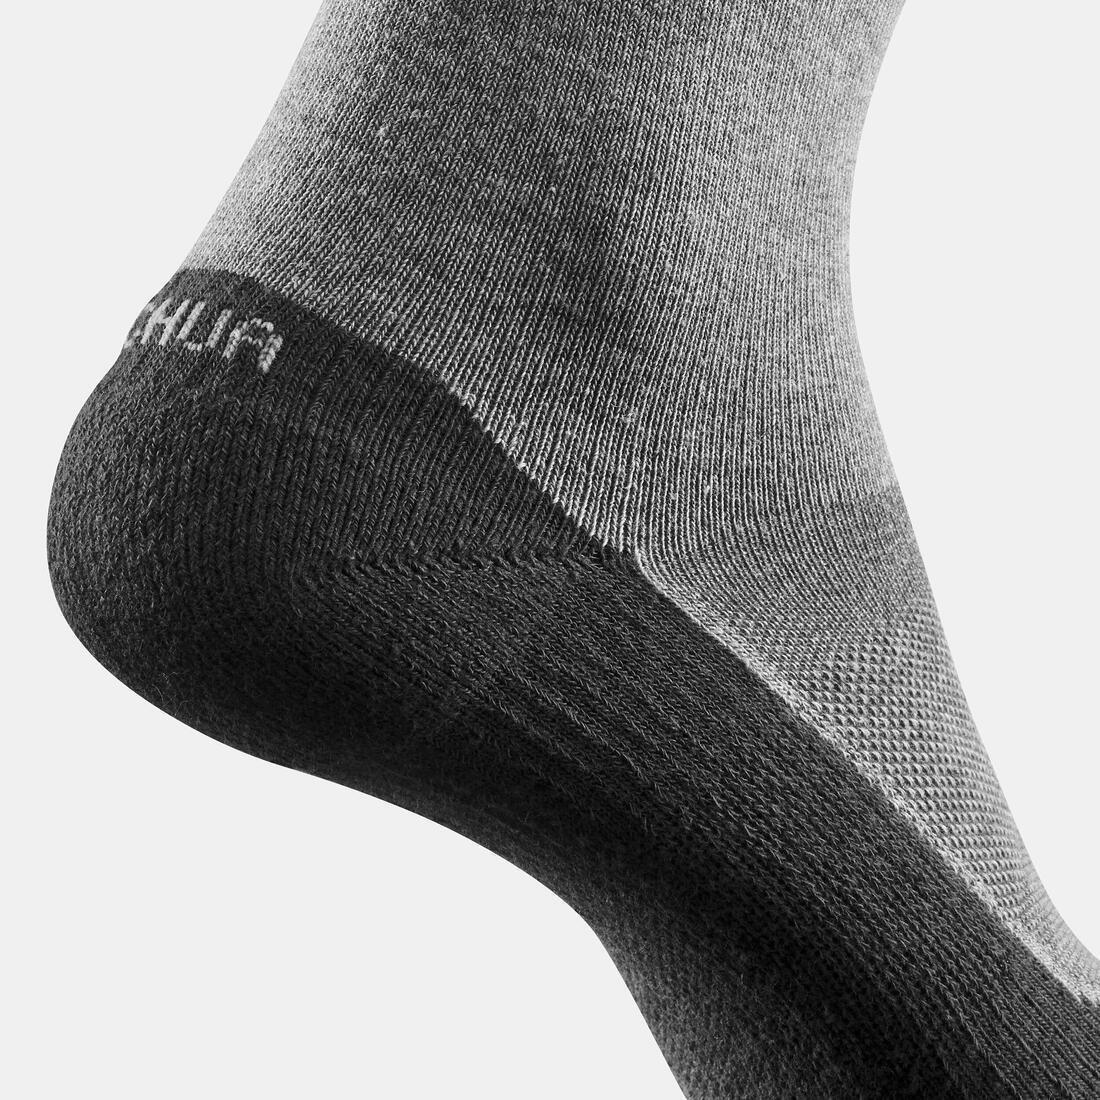 QUECHUA - Sock Hike 50 High - Pack Of 2 Pairs, Grey